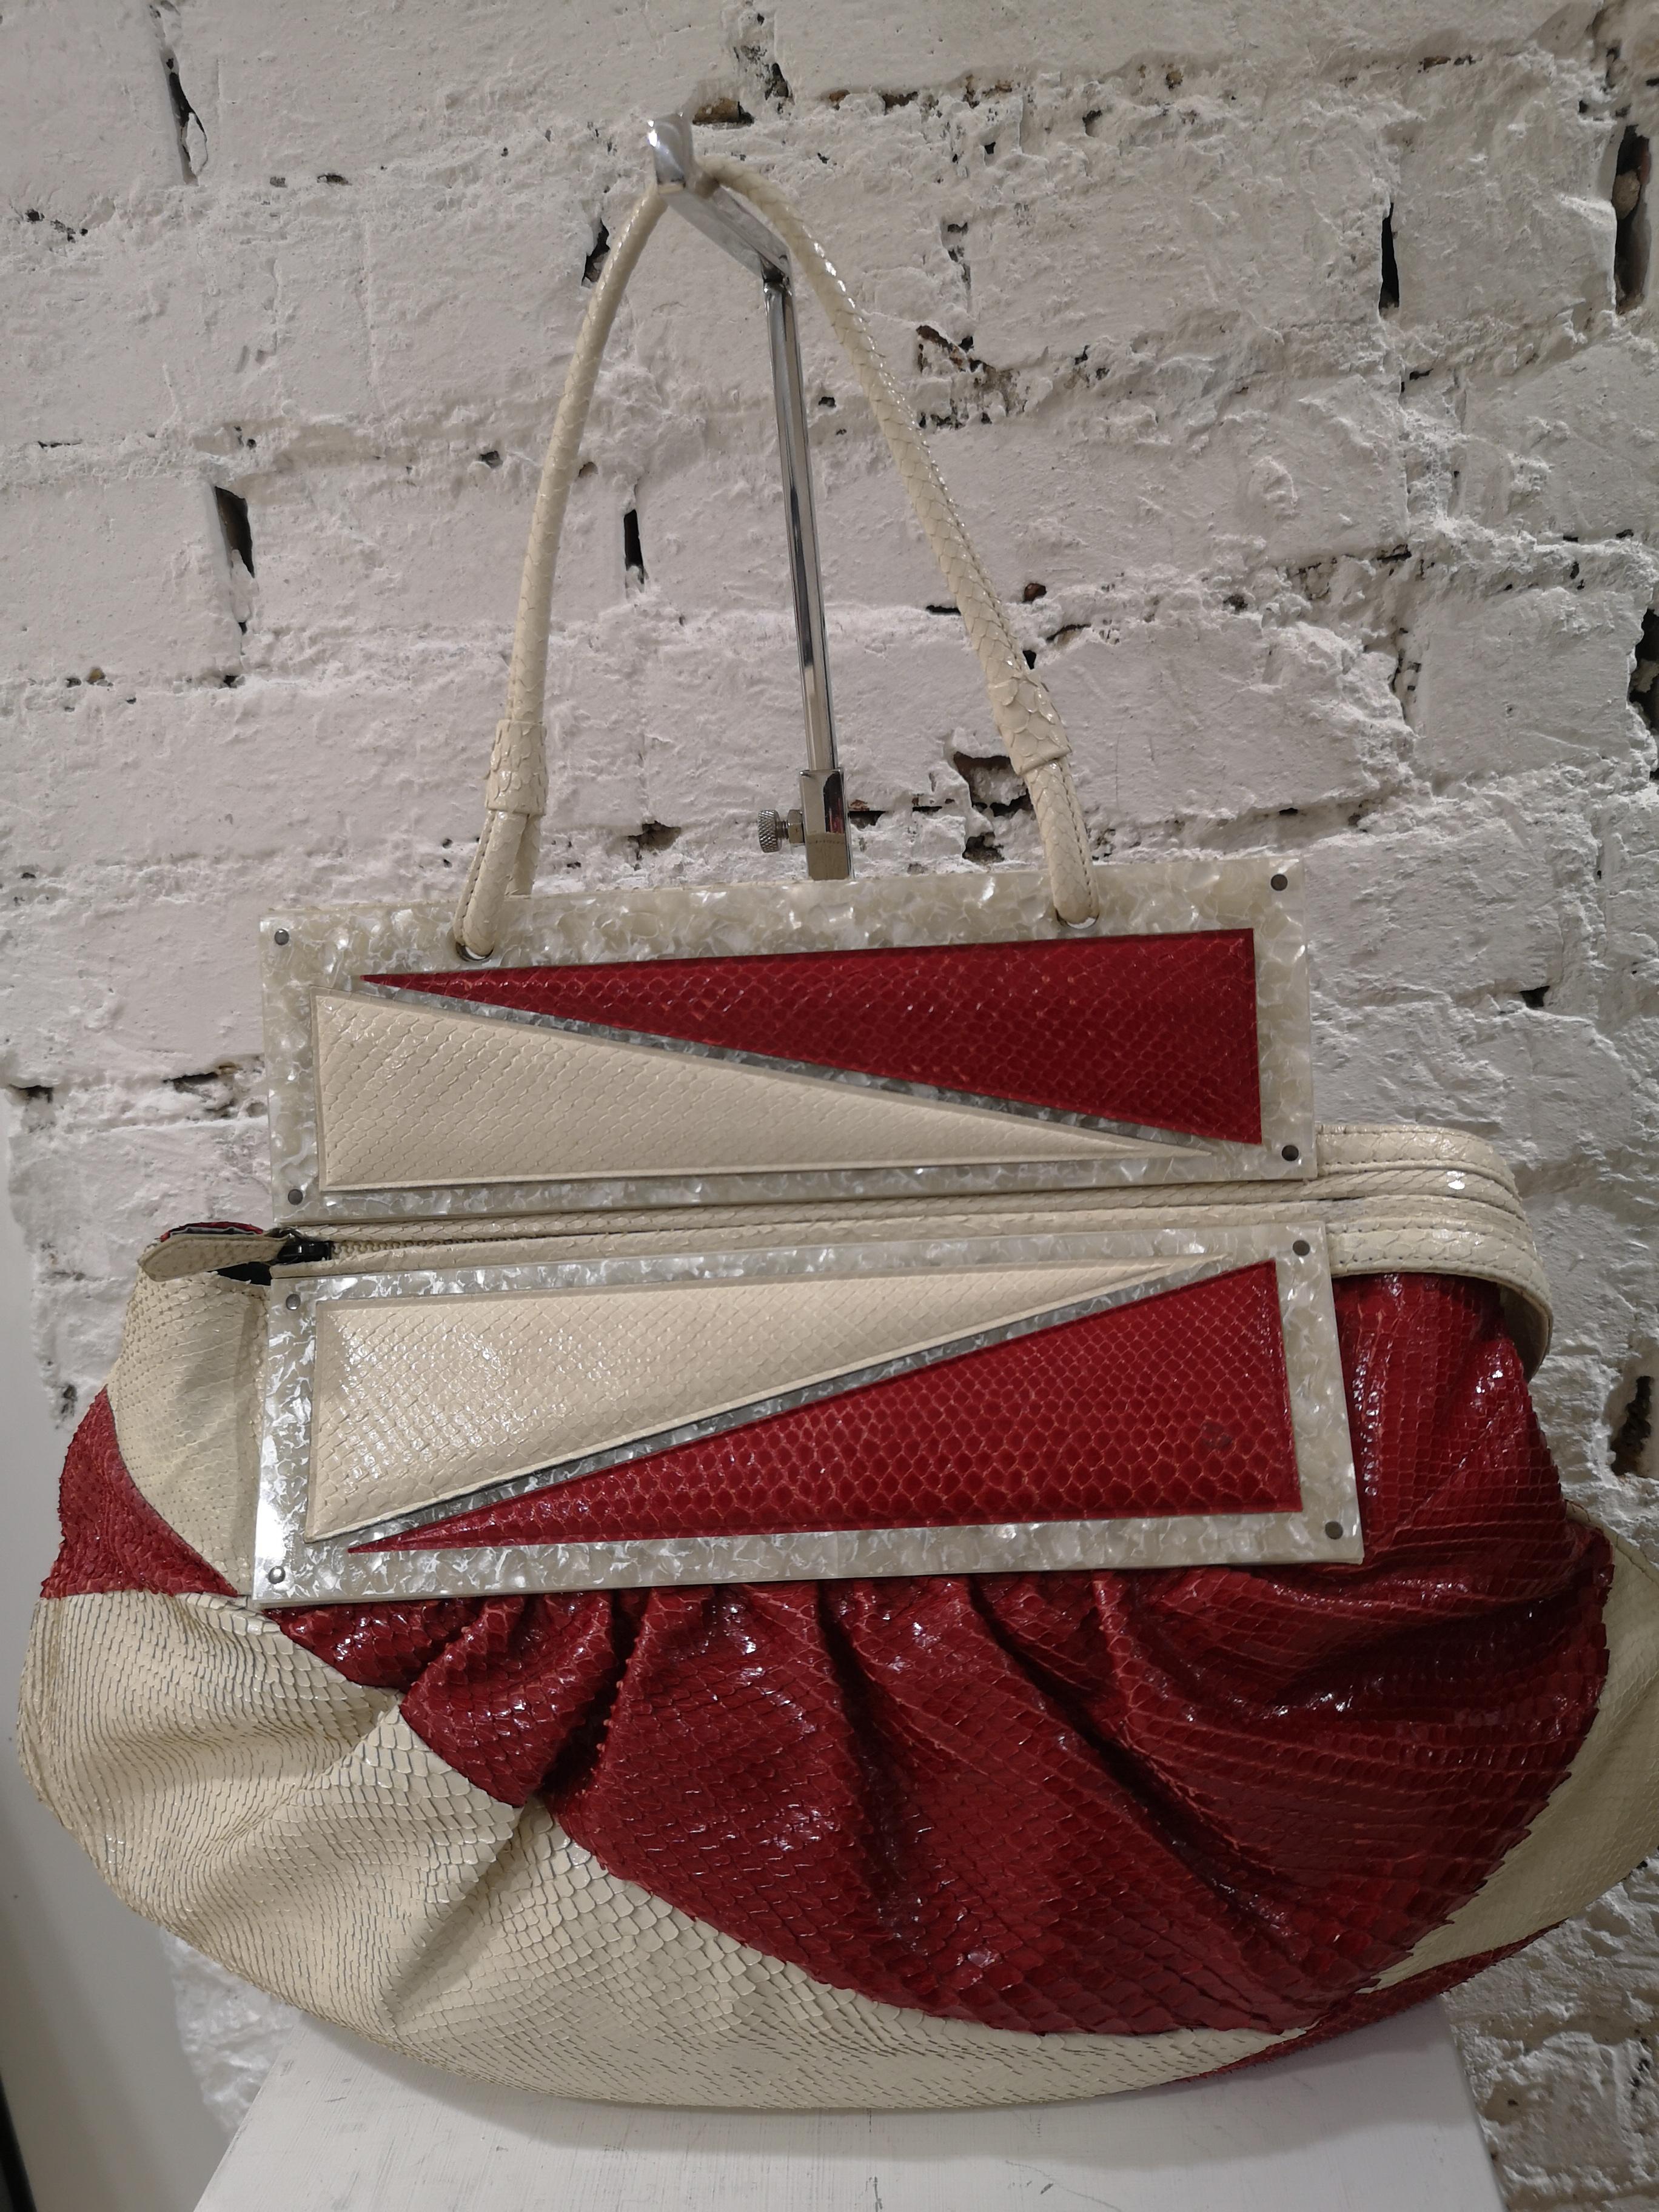 Fendi python skin cream and red shoulder bag
embellished with mother pearl on the front
height 28 cm
widht 48 cm
depth 16 cm